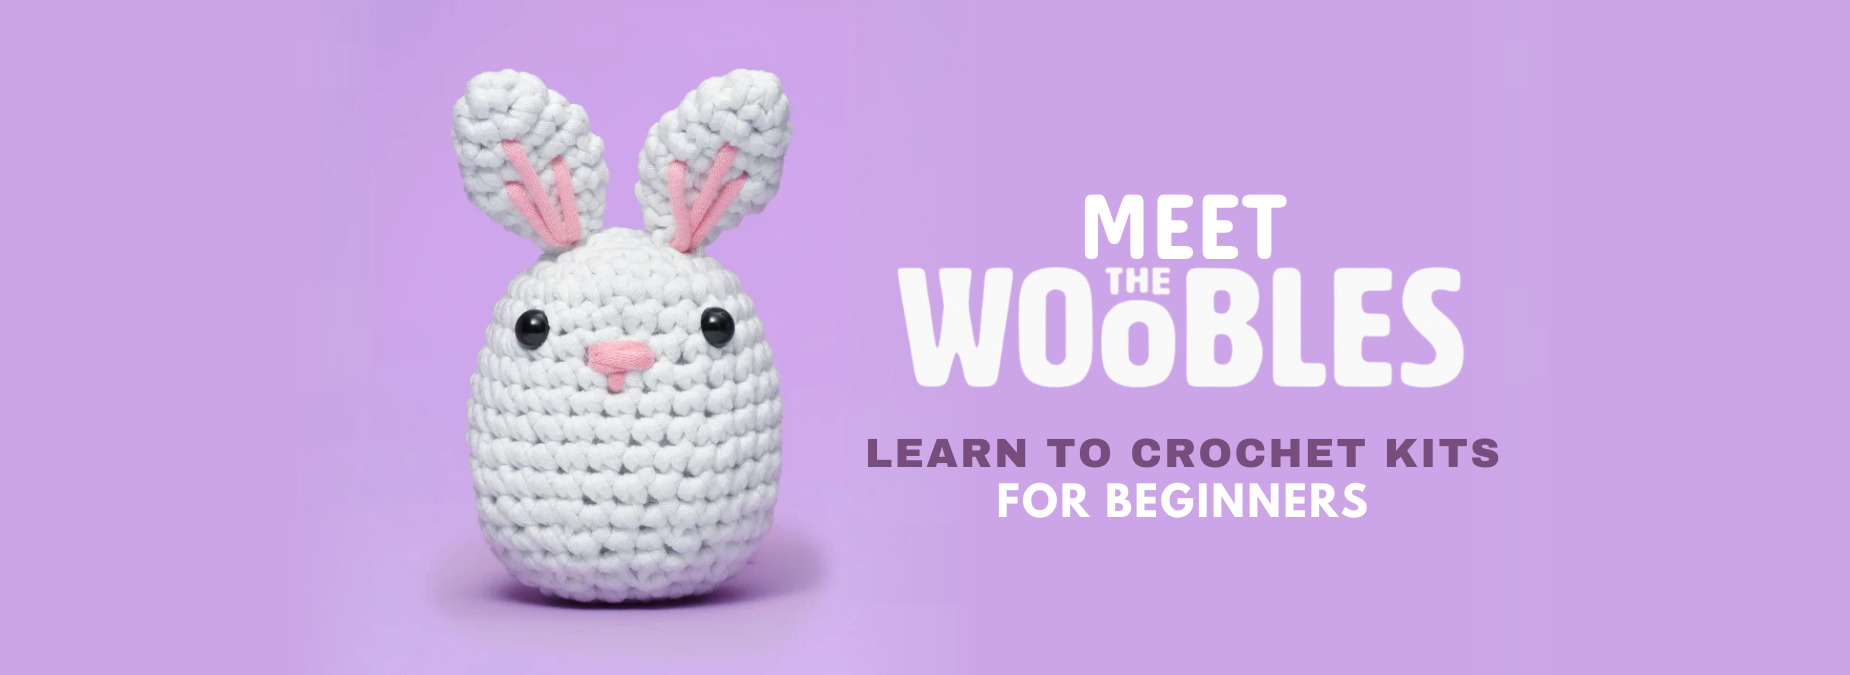 Meet The Woobles - Learn to Crochet Kits for Beginners